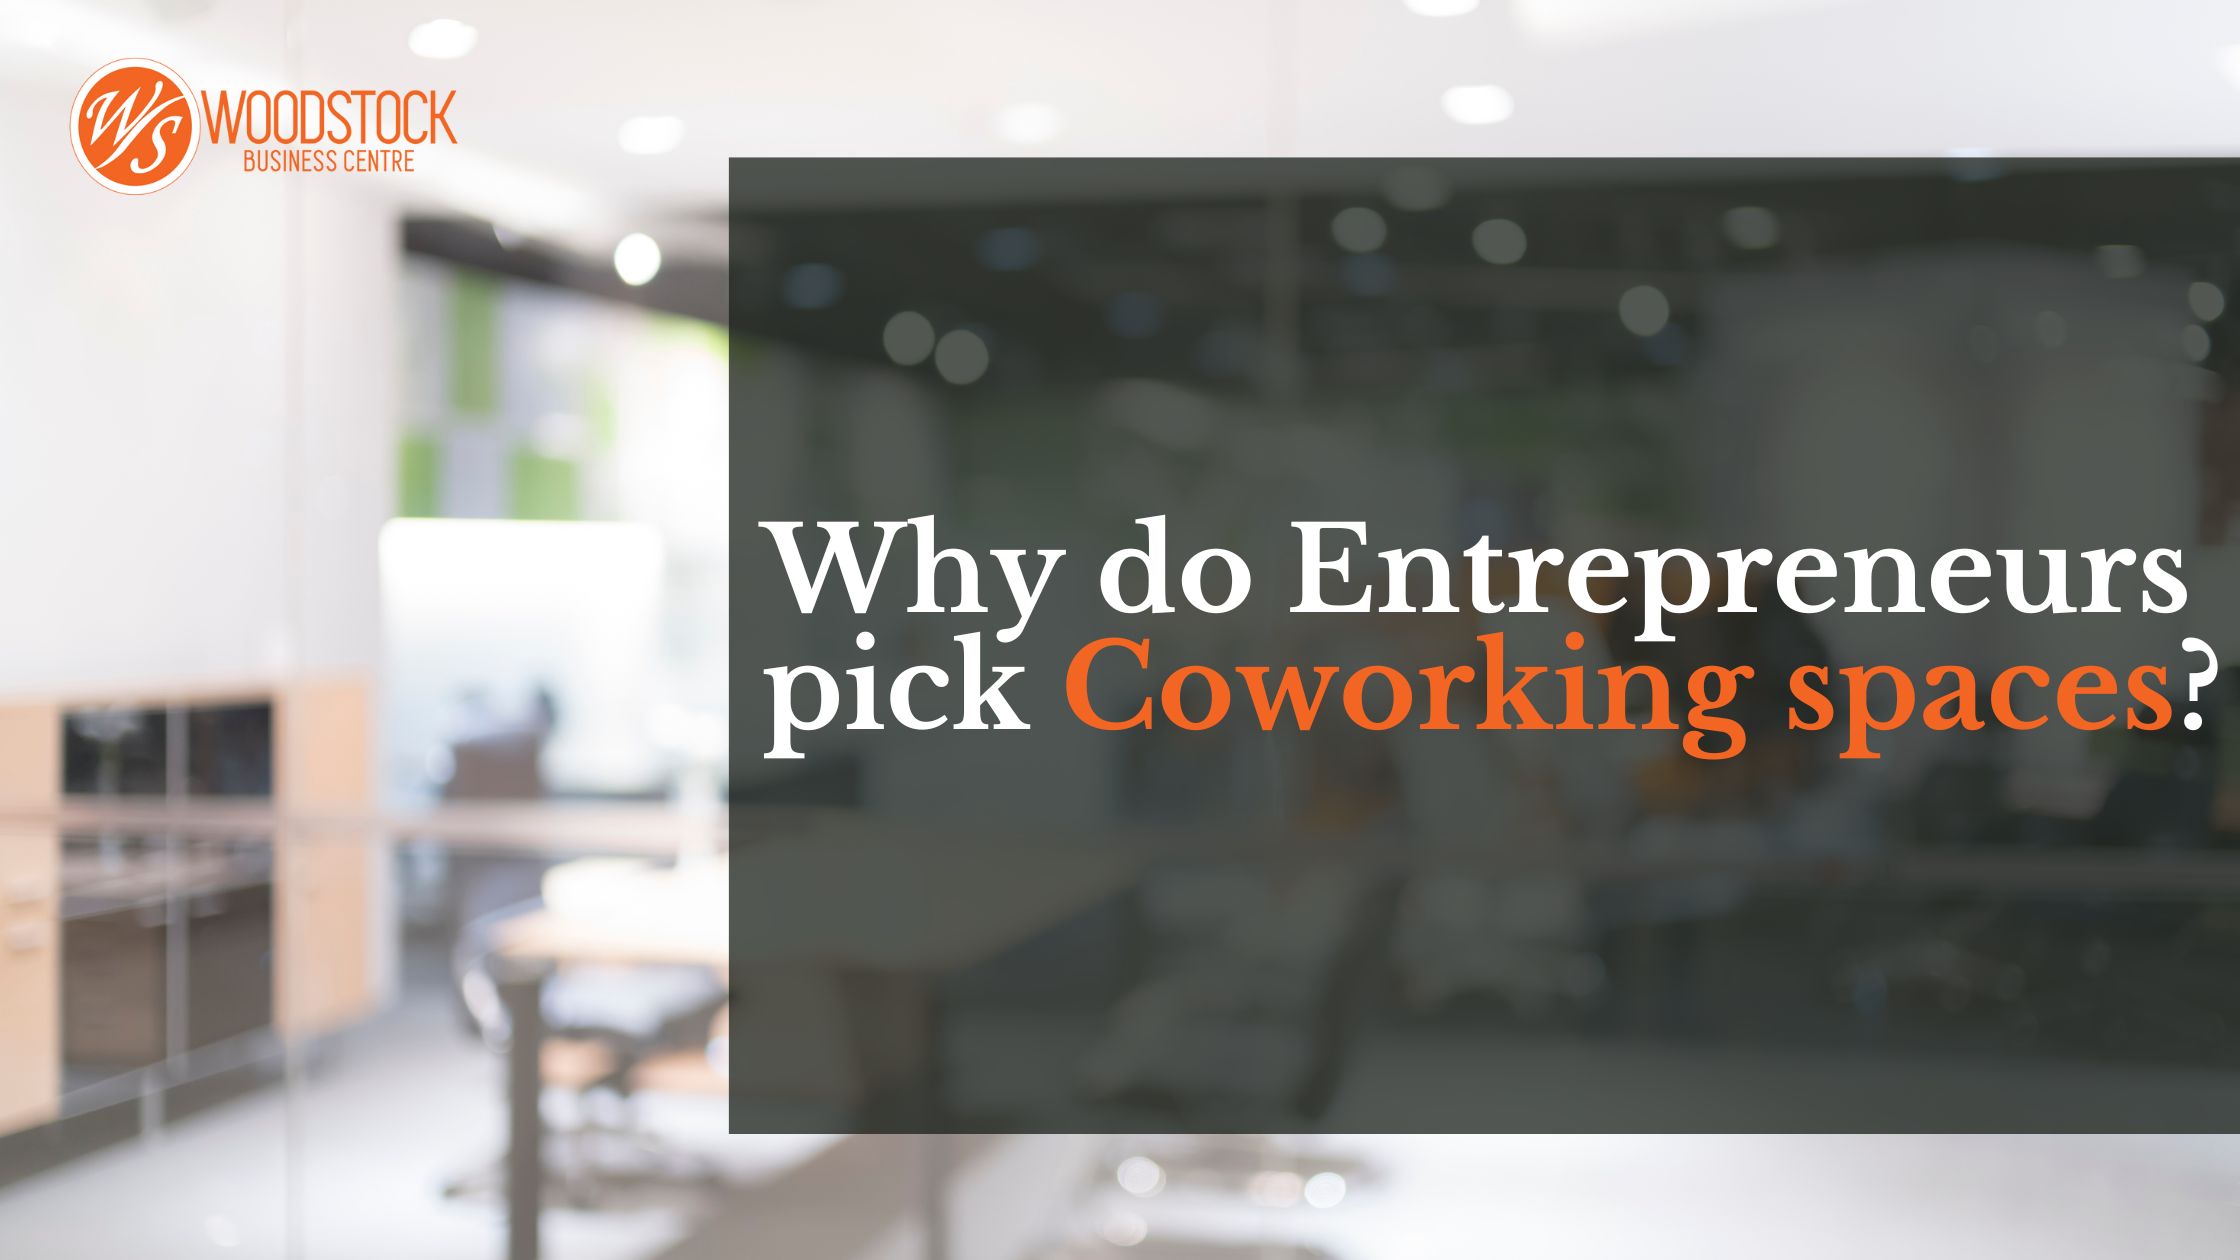 Why do business owners choose coworking spaces?